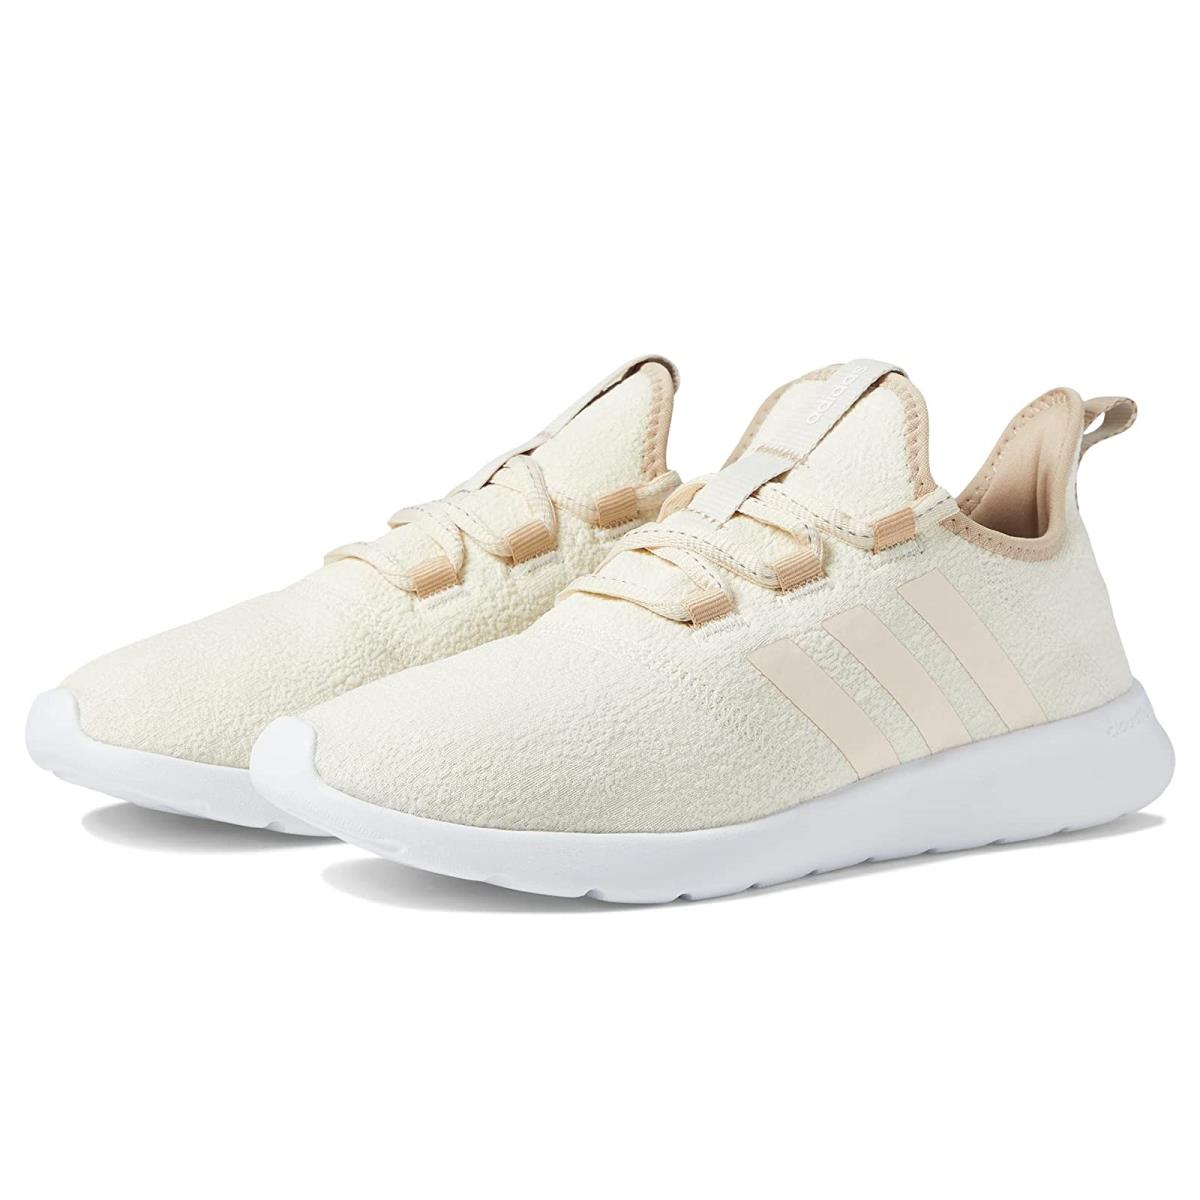 Woman`s Sneakers Athletic Shoes Adidas Running Cloudfoam Pure 2.0 Wonder White/Bliss Orange/Magic Beige